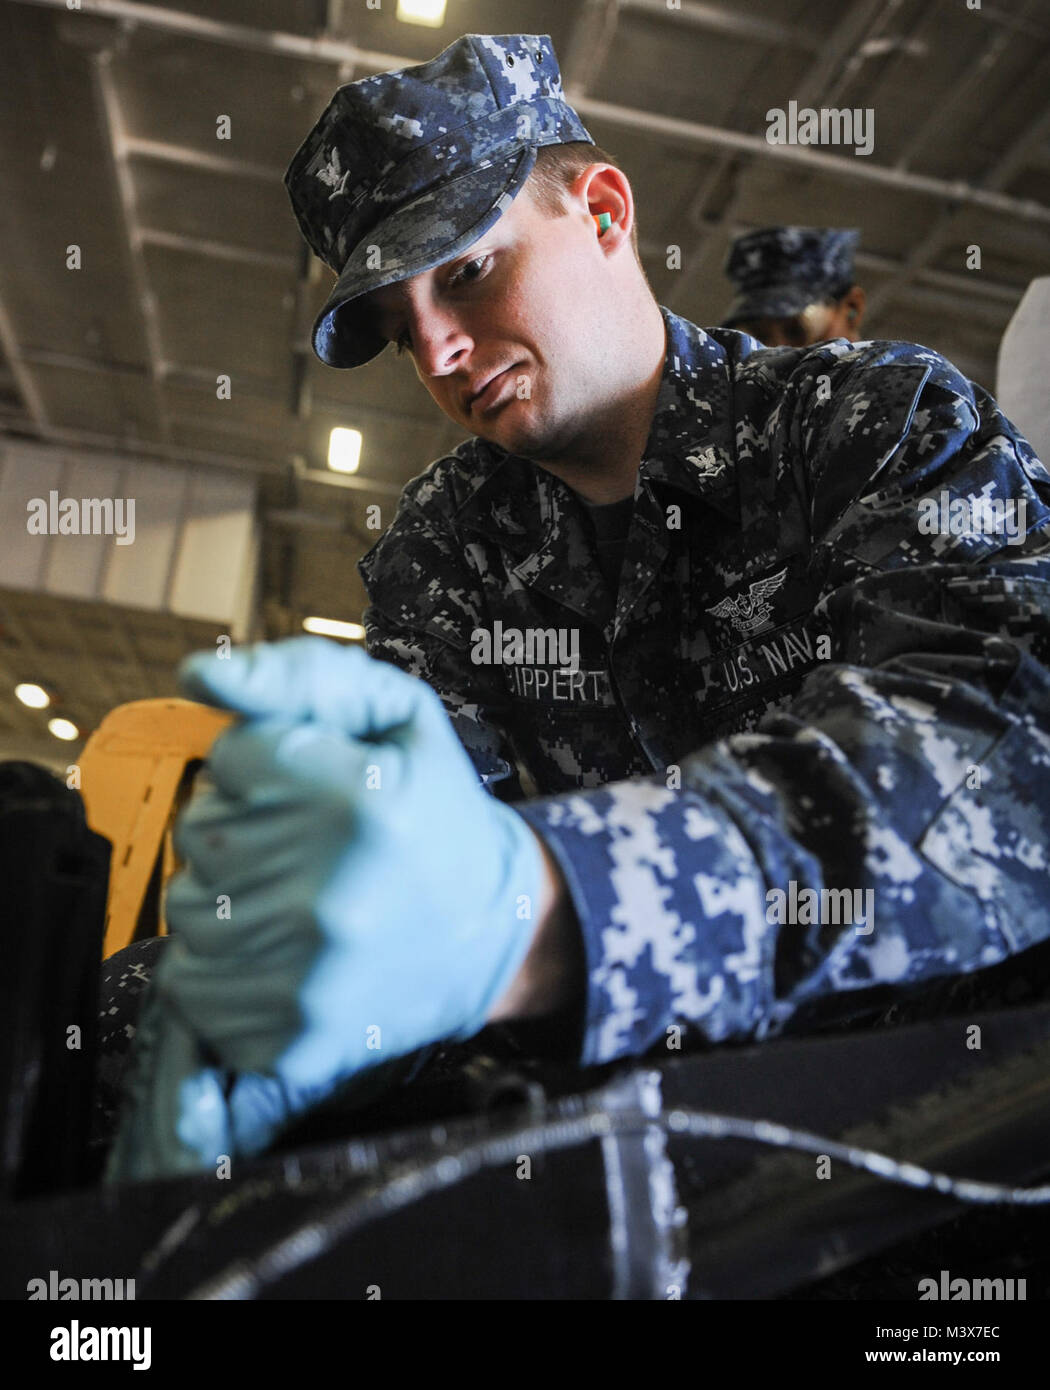 EVERETT, Wash. (May 20, 2014)- Aviation Ordnanceman 3rd Class Clinton Bippert, of Castroville, Texas, performs maintenance on a pallet jack in the hangar bay of the aircraft carrier USS Nimitz (CVN 68). Nimitz is currently pierside at its homeport of Naval Station Everett. (U.S. Navy photo by Mass Communication Specialist Seaman Kelly M. Agee/Released) 140520-N-AZ866-035.JPG by USS NIMITZ (CVN 68) Stock Photo